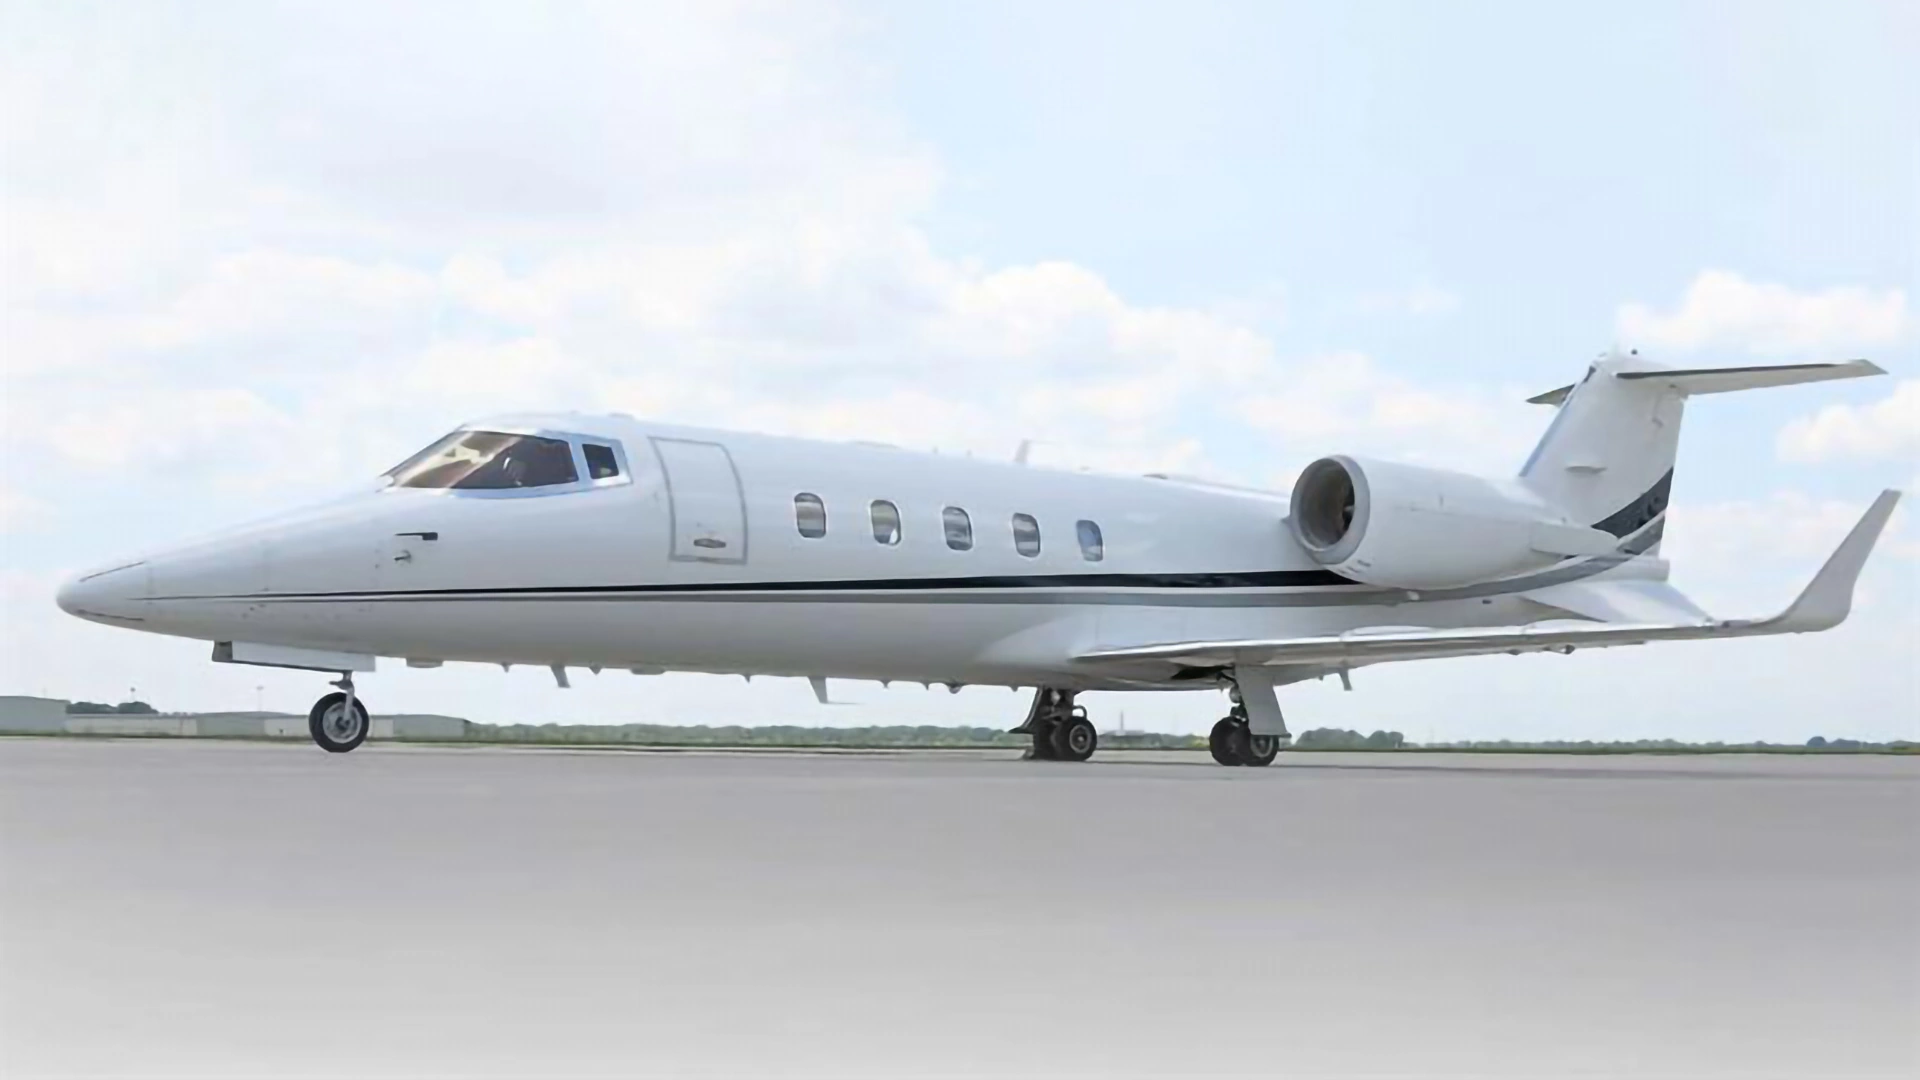 Alerion Bombardier LR-60 - N60GF available for private charter by Alerion Aviation.